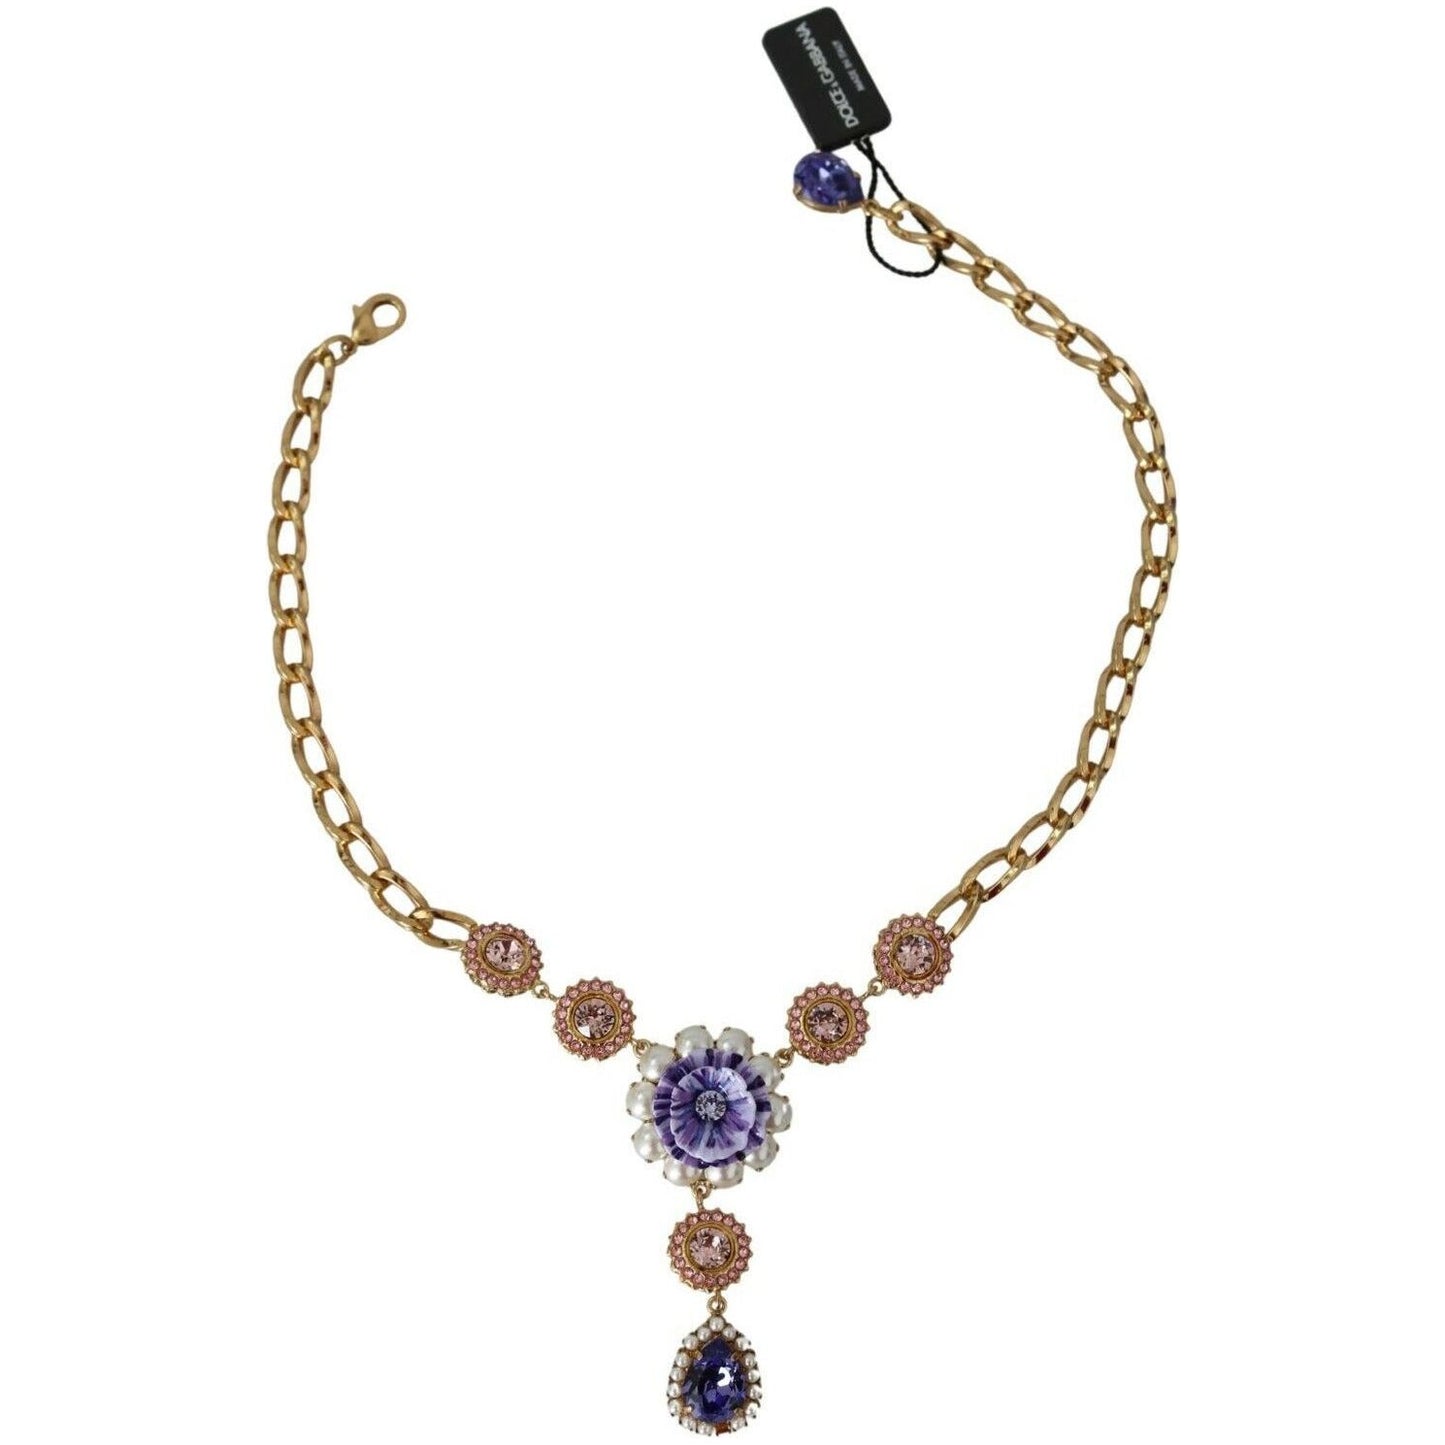 WOMAN NECKLACE Elegant Gold Crystal Floral Charm Necklace Dolce & Gabbana